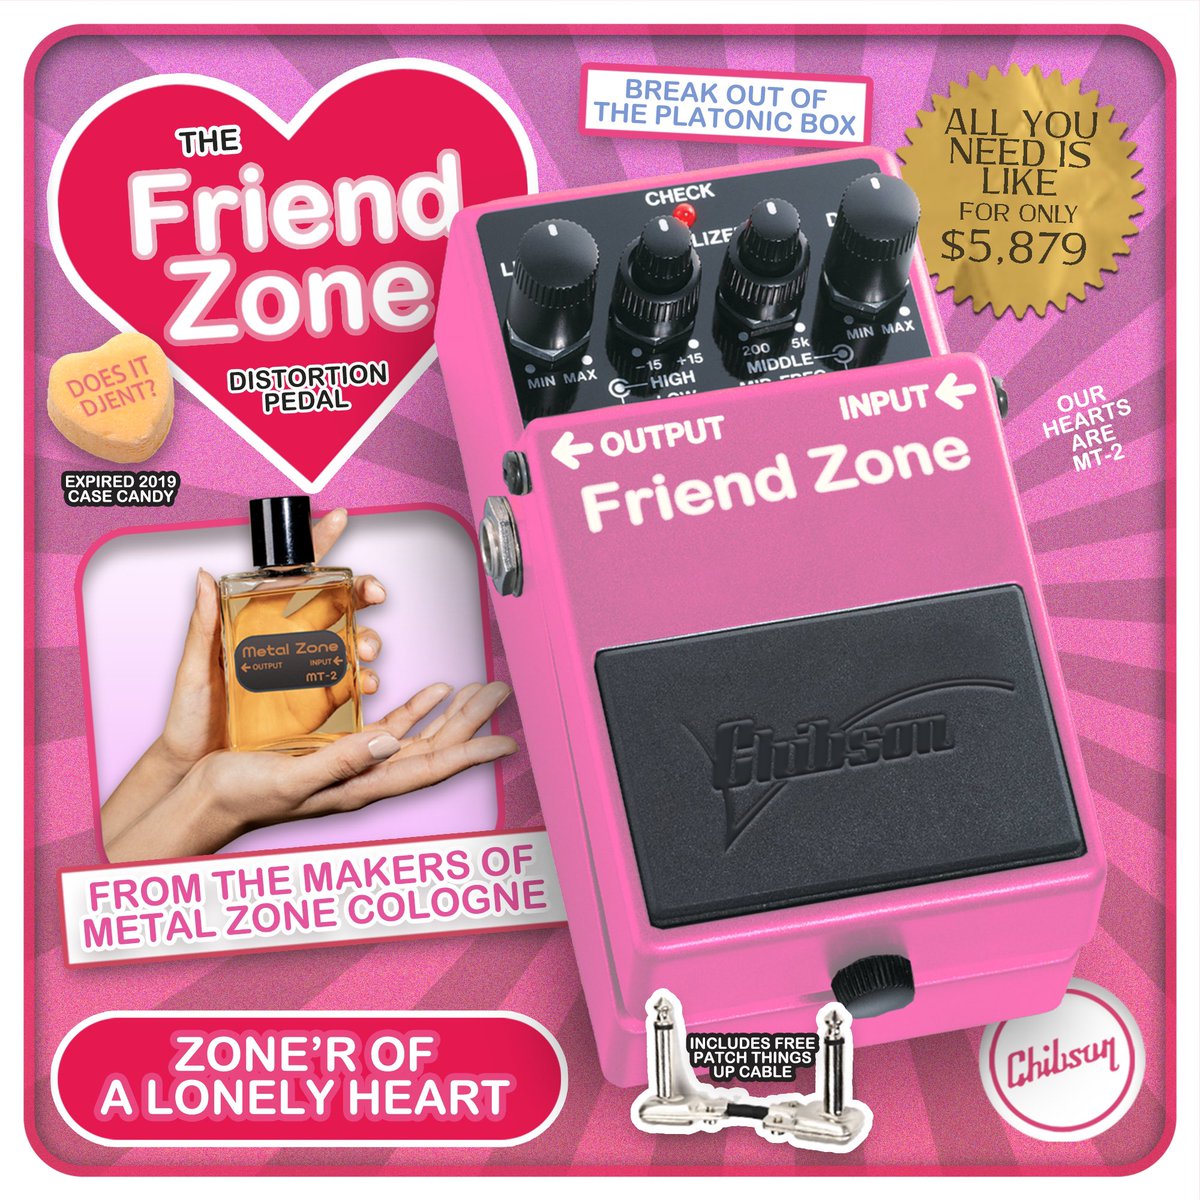 Zone is in the fingers 

#chibson #chib #chibs #chibi #valentines #guitar #metalzone #guitarpedal #pedal #gear #platonic #pedaldemo #friendzone #onlyachibsonisgoodenough